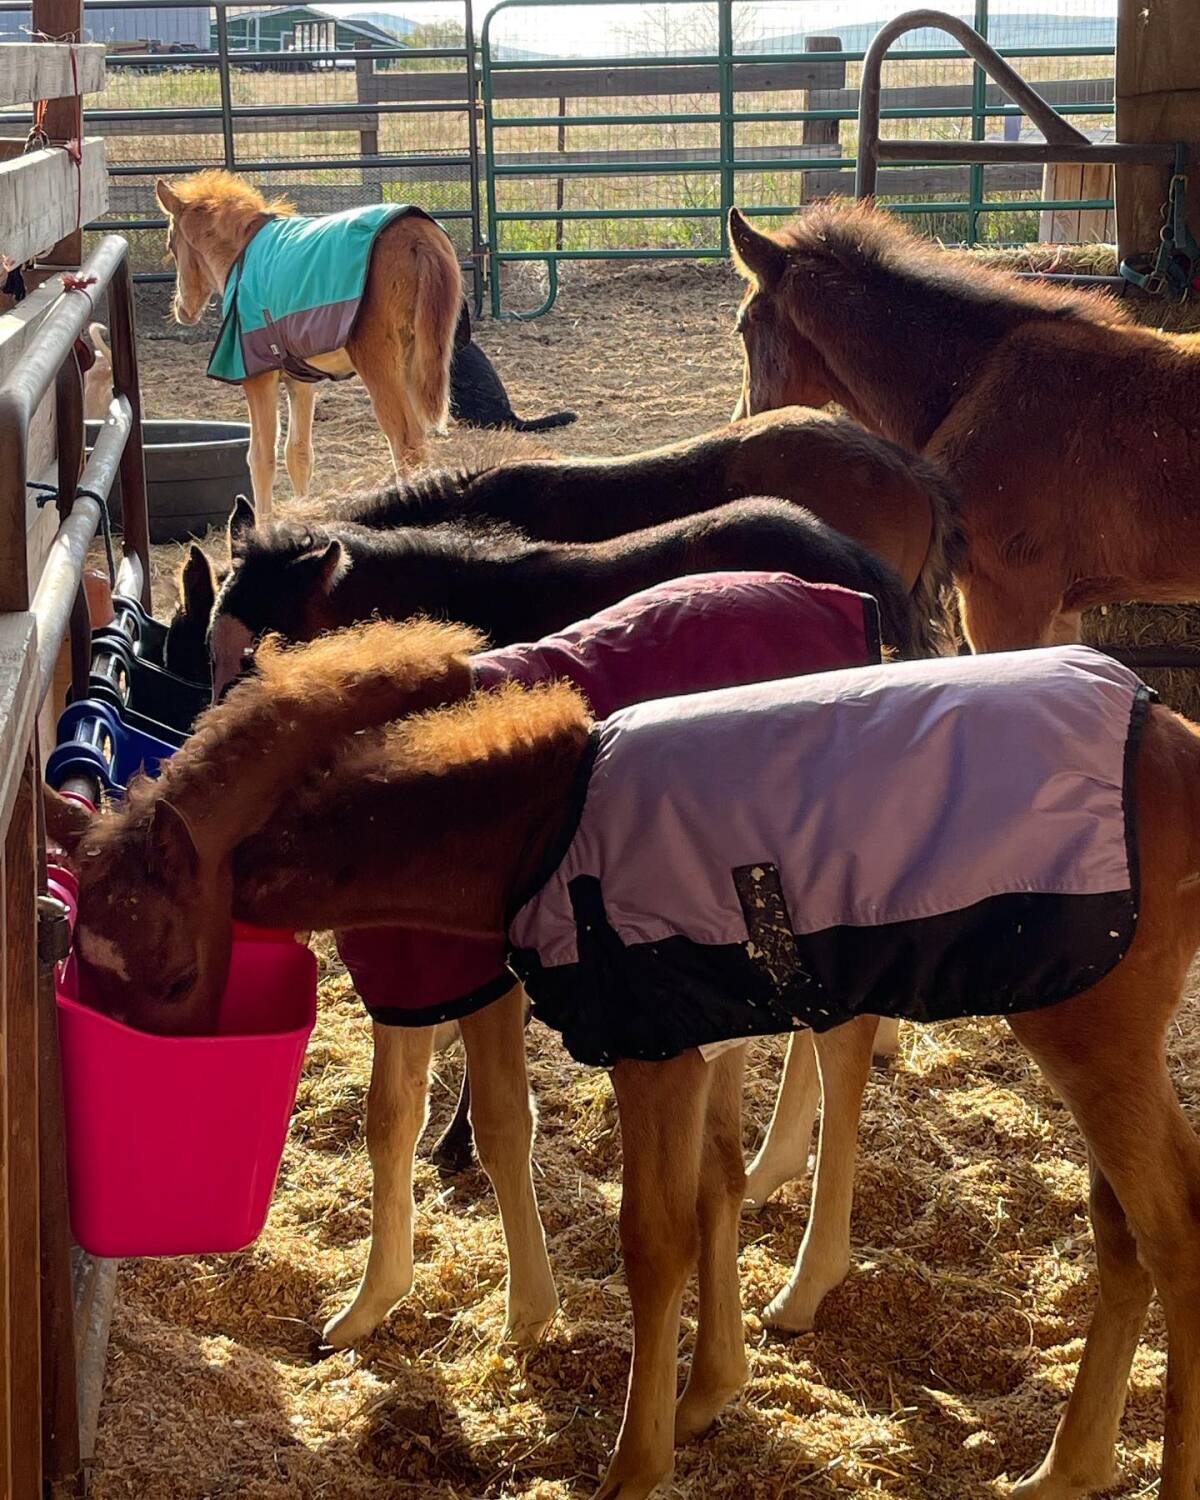 Laughing Pony in Rancho Santa Fe helped save 20 foals.